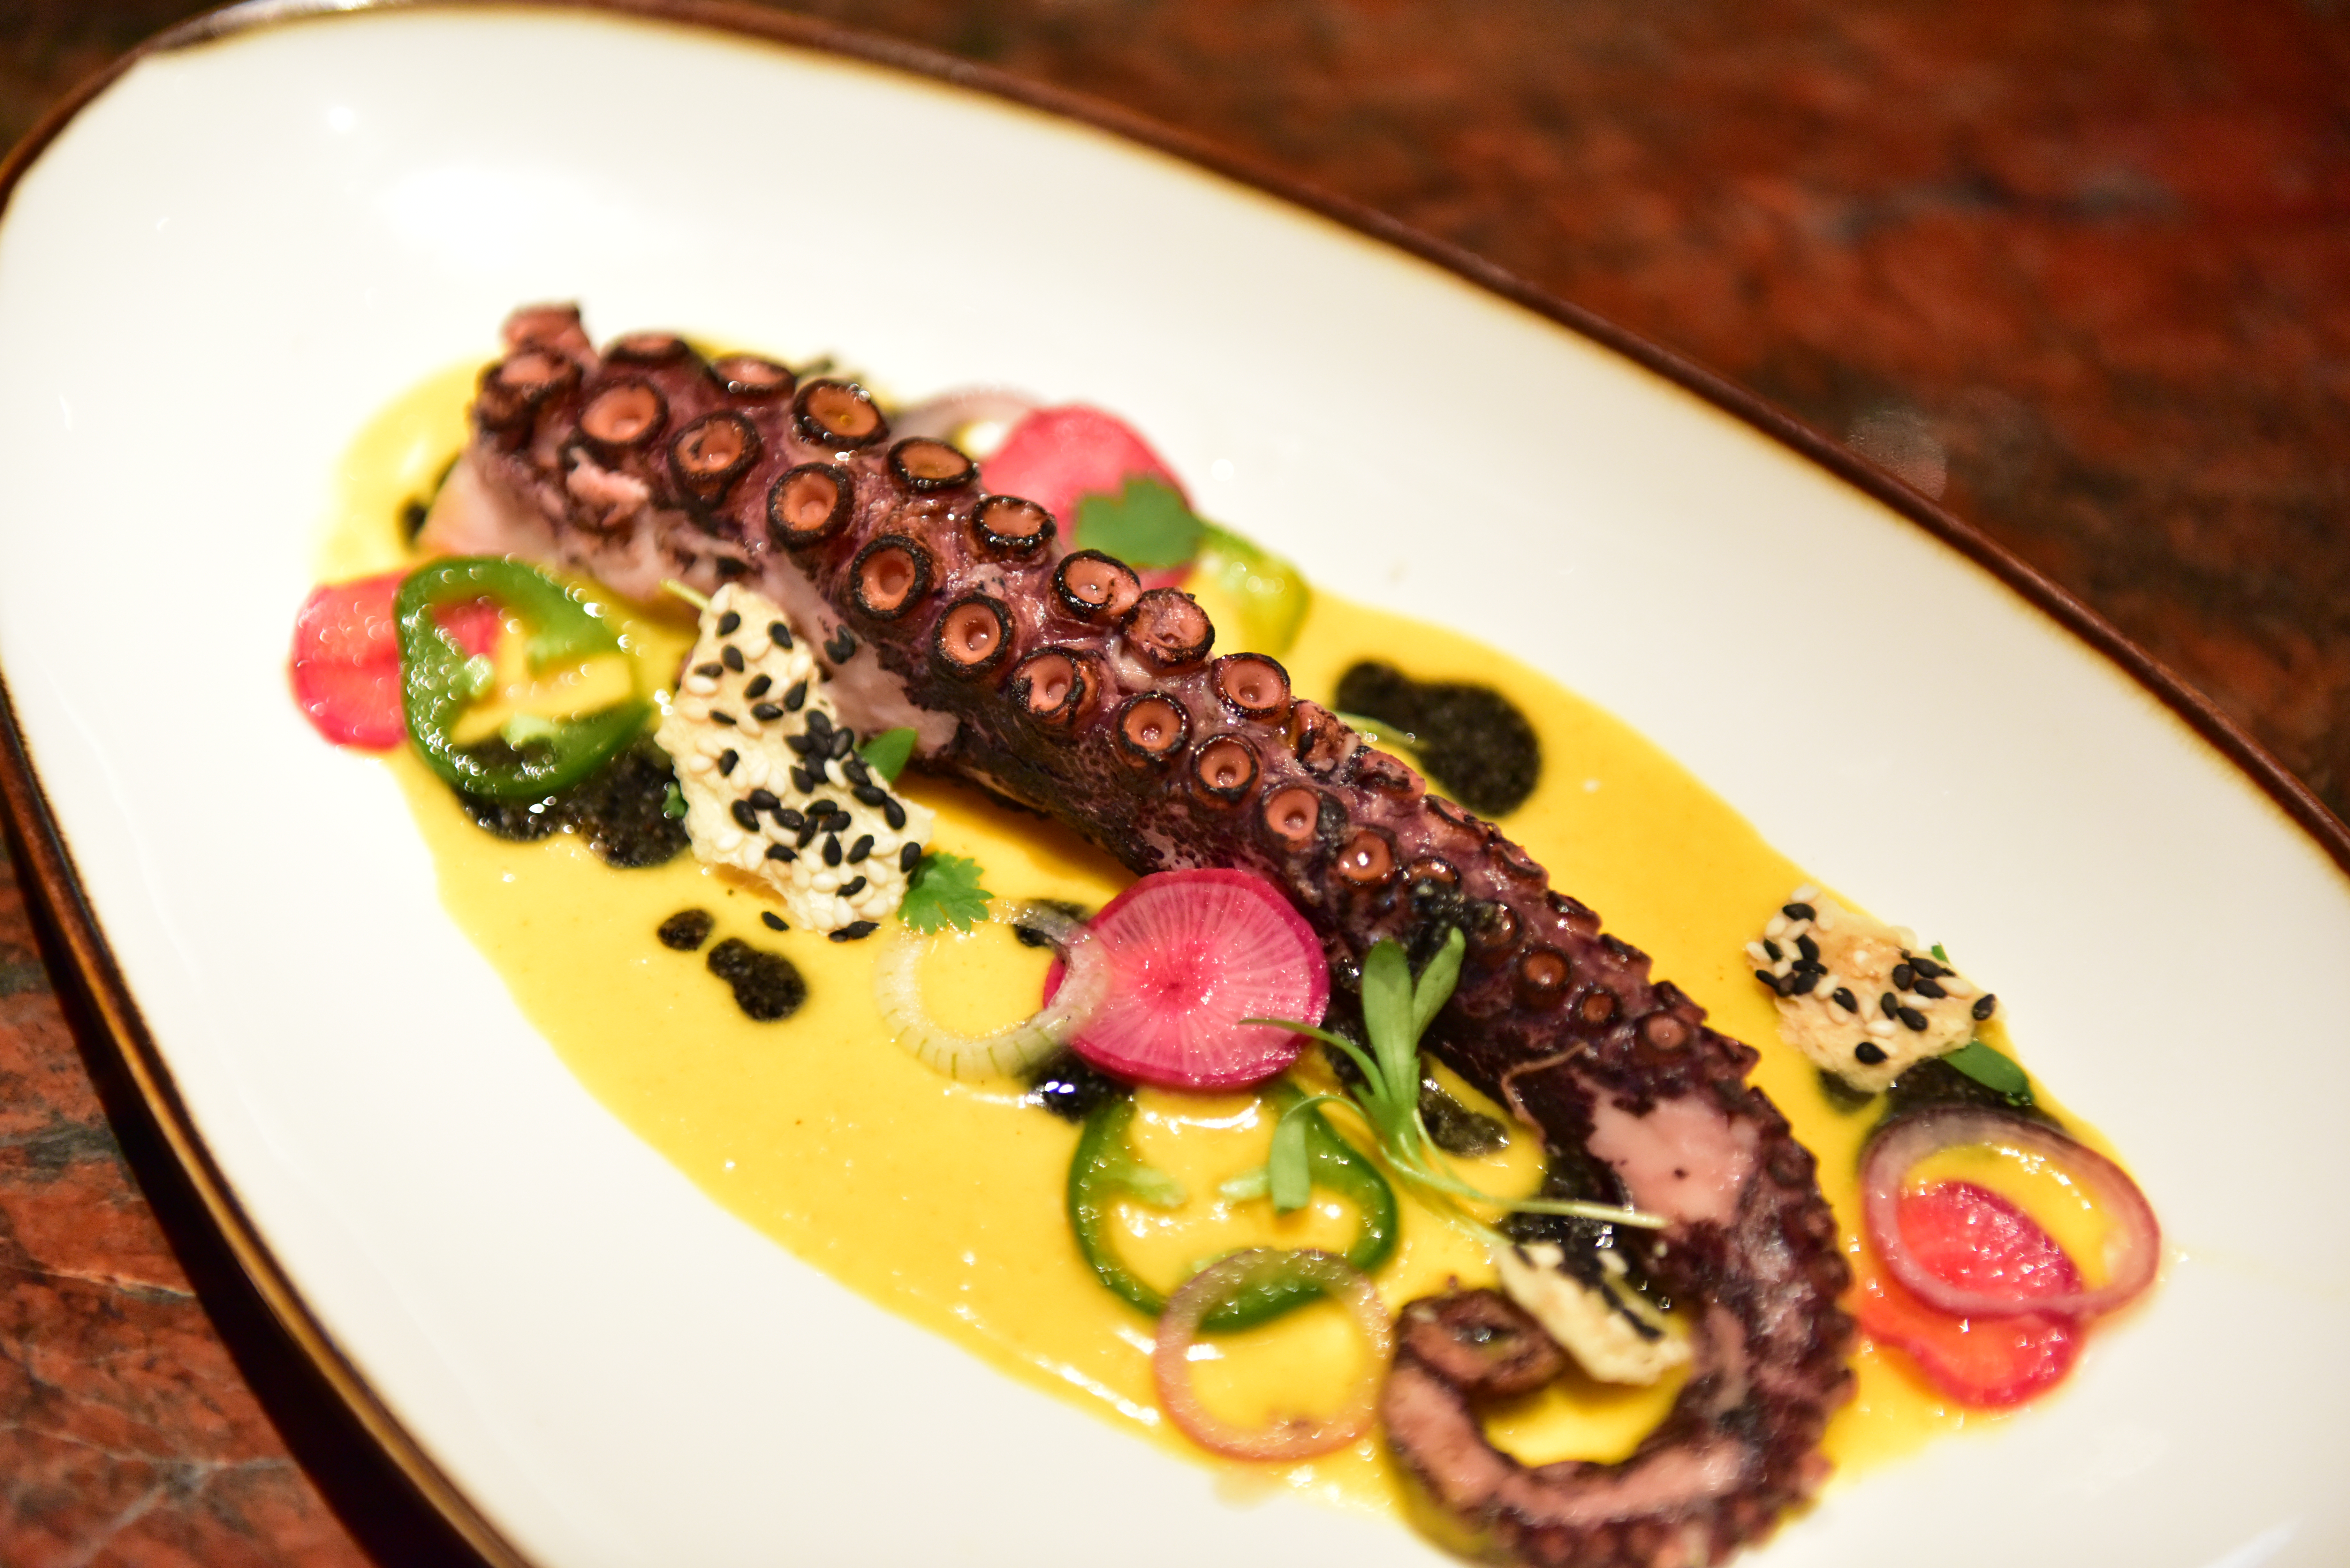 Charred octopus from elements dinner menu.